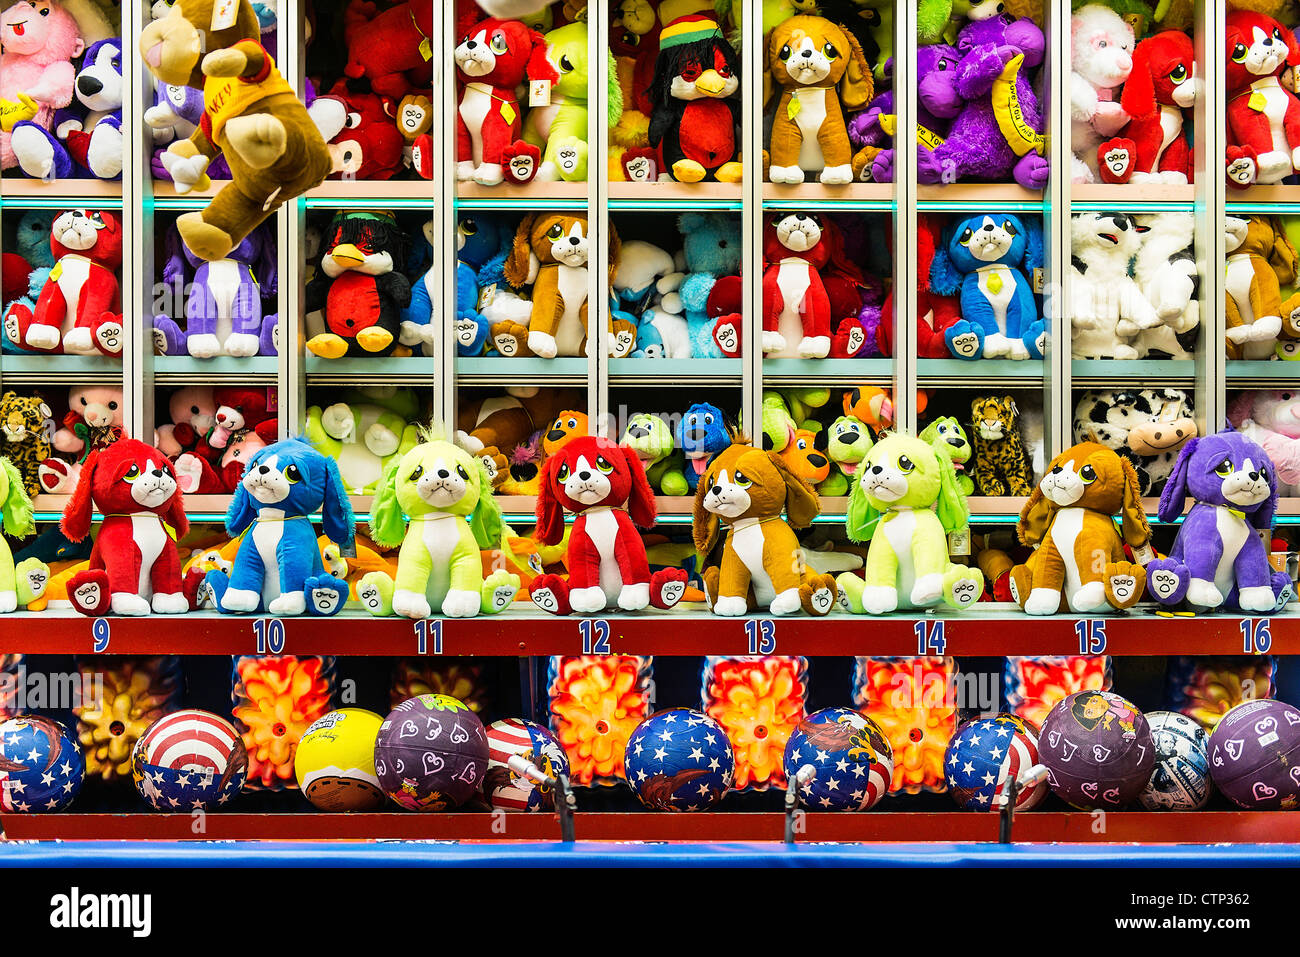 Stuffed animals prizes at a carnival game. Stock Photo